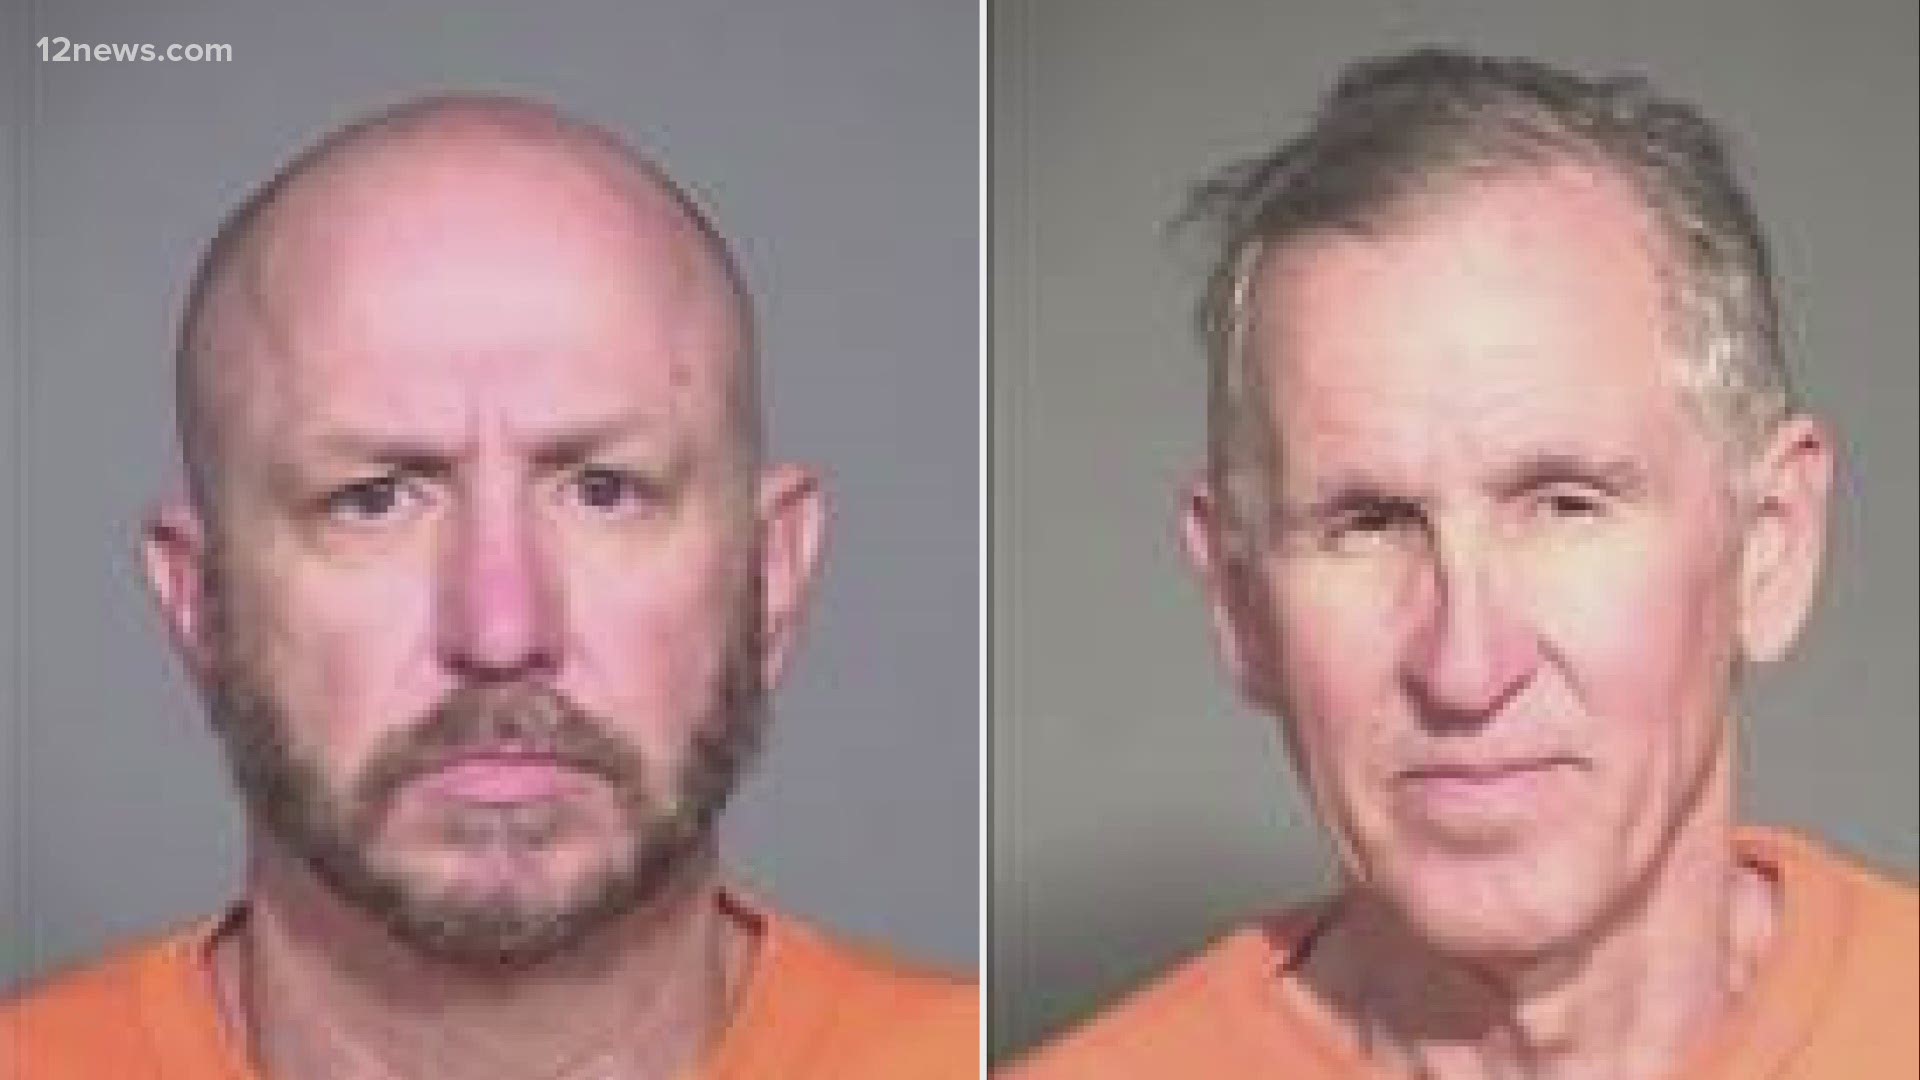 Two men escaped from prison using bolt and wire cutters while on their recreational time.